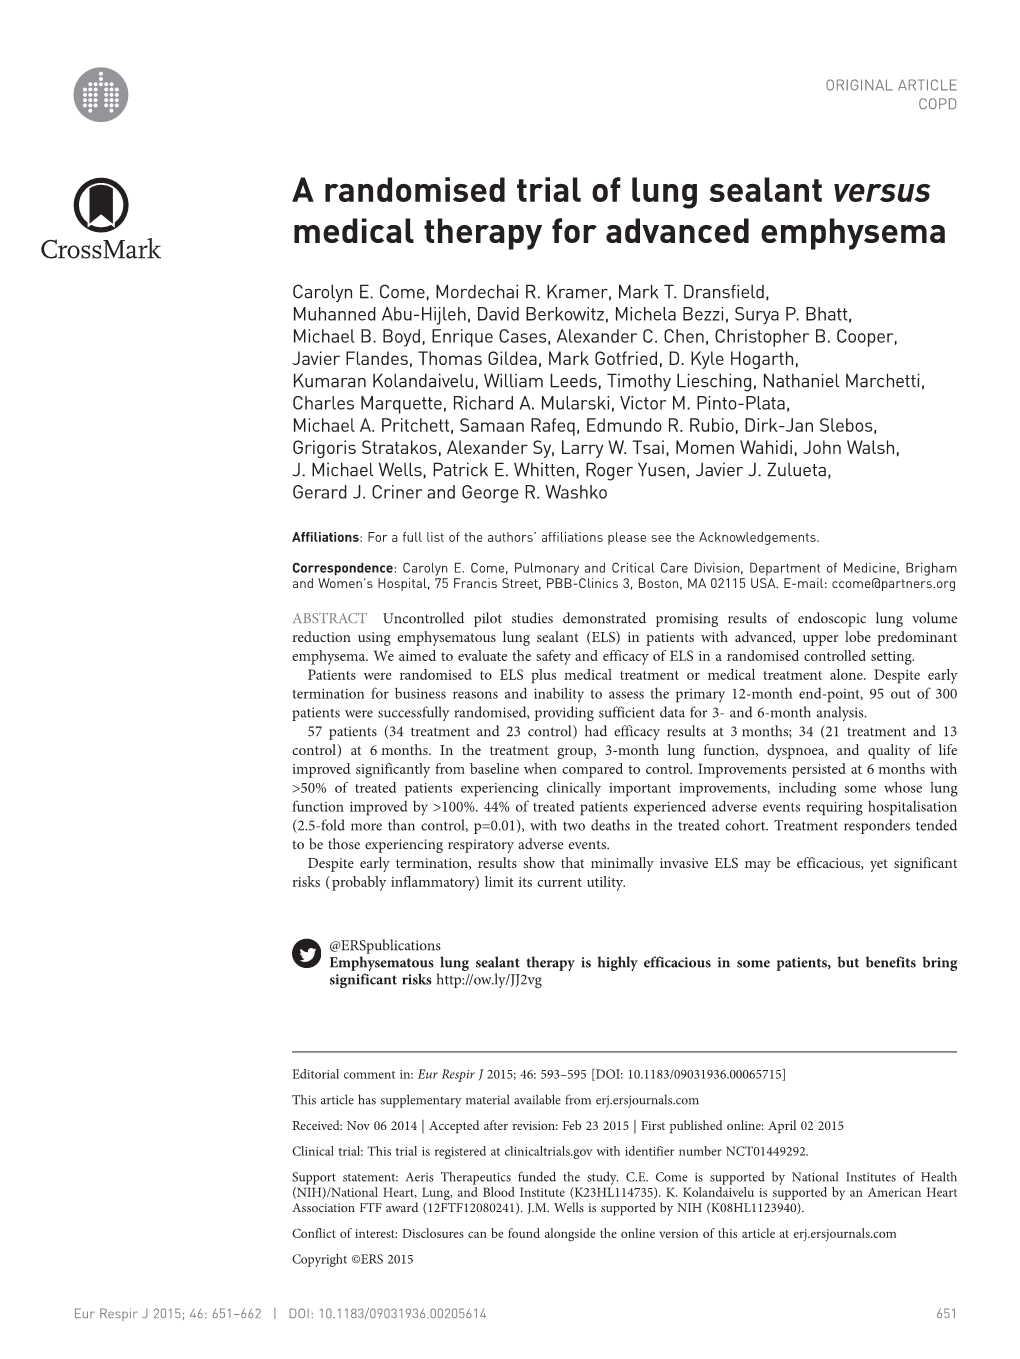 A Randomised Trial of Lung Sealant Versus Medical Therapy for Advanced Emphysema